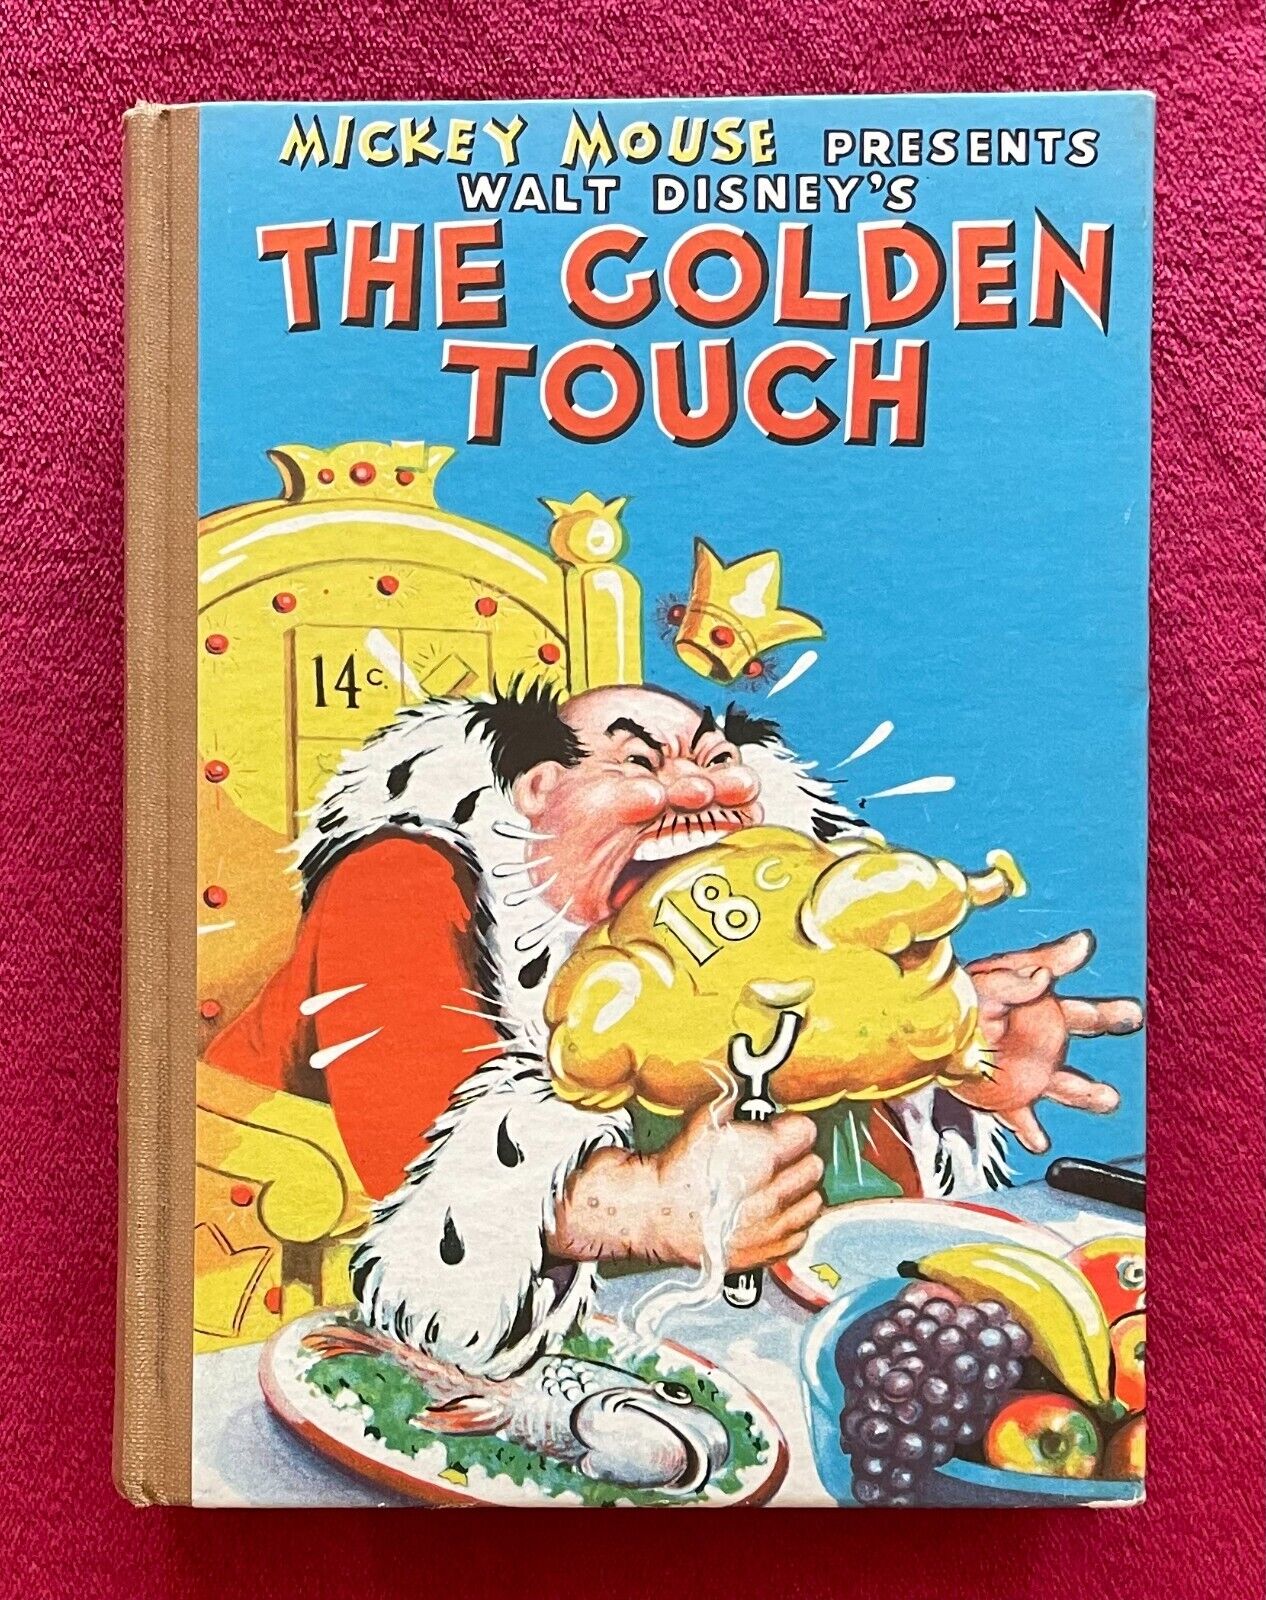 THE GOLDEN TOUCH by WALT DISNEY - 1937 - THE STORY OF GREEDY KING MIDAS